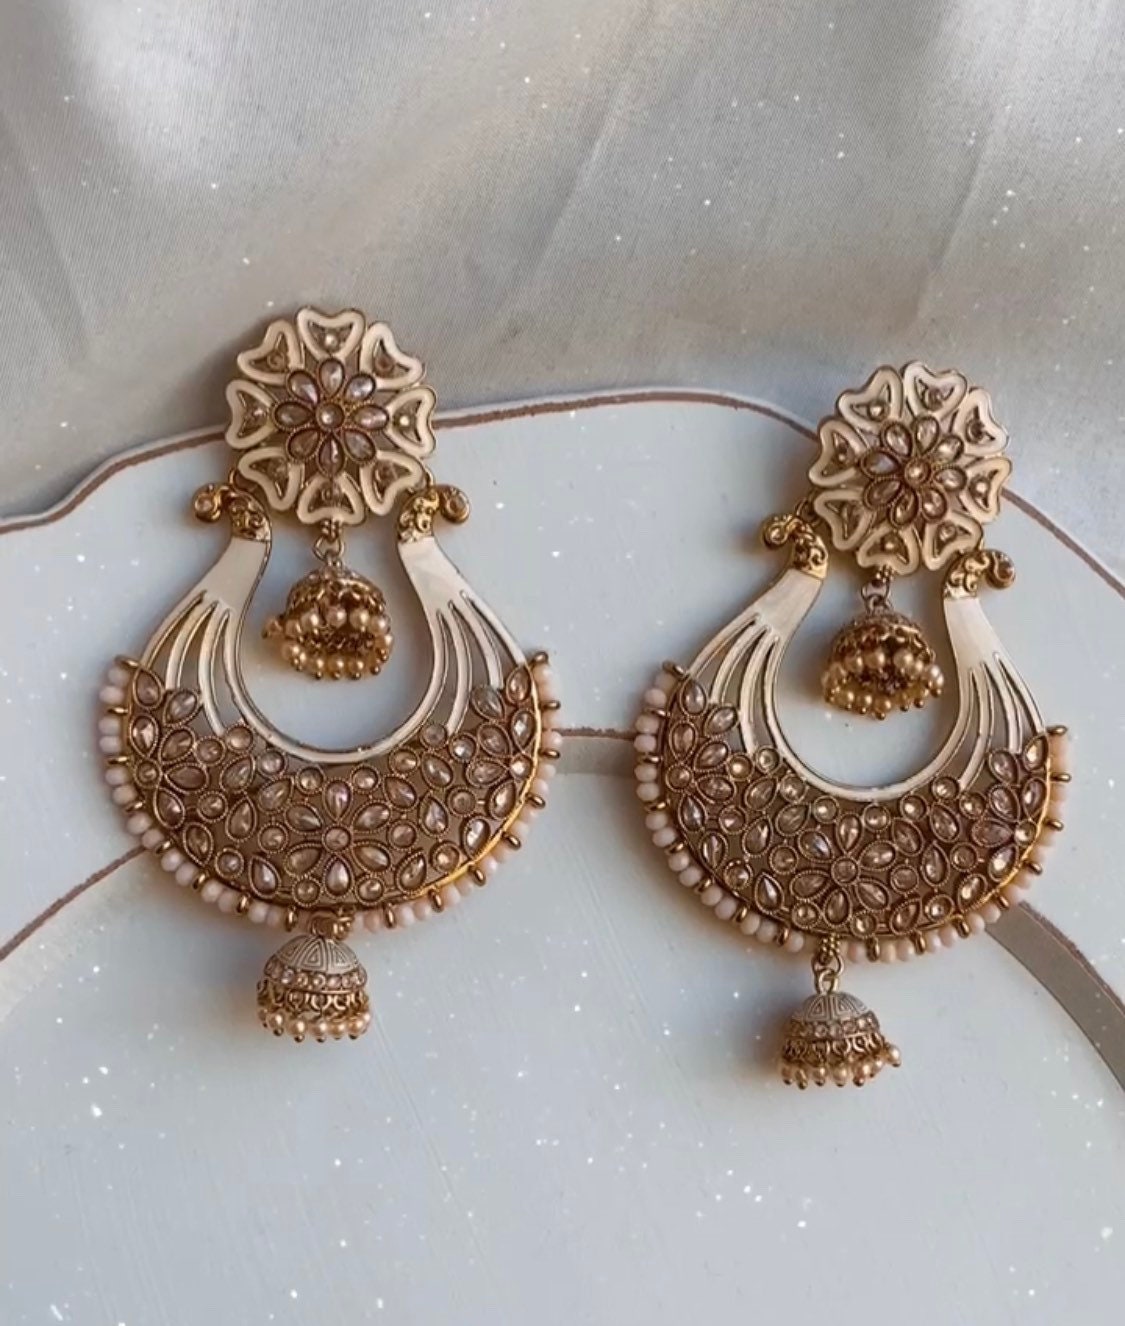 Bollywood Gold Plated Choker Necklace Earrings Set Women Artificial Jewelry  | eBay